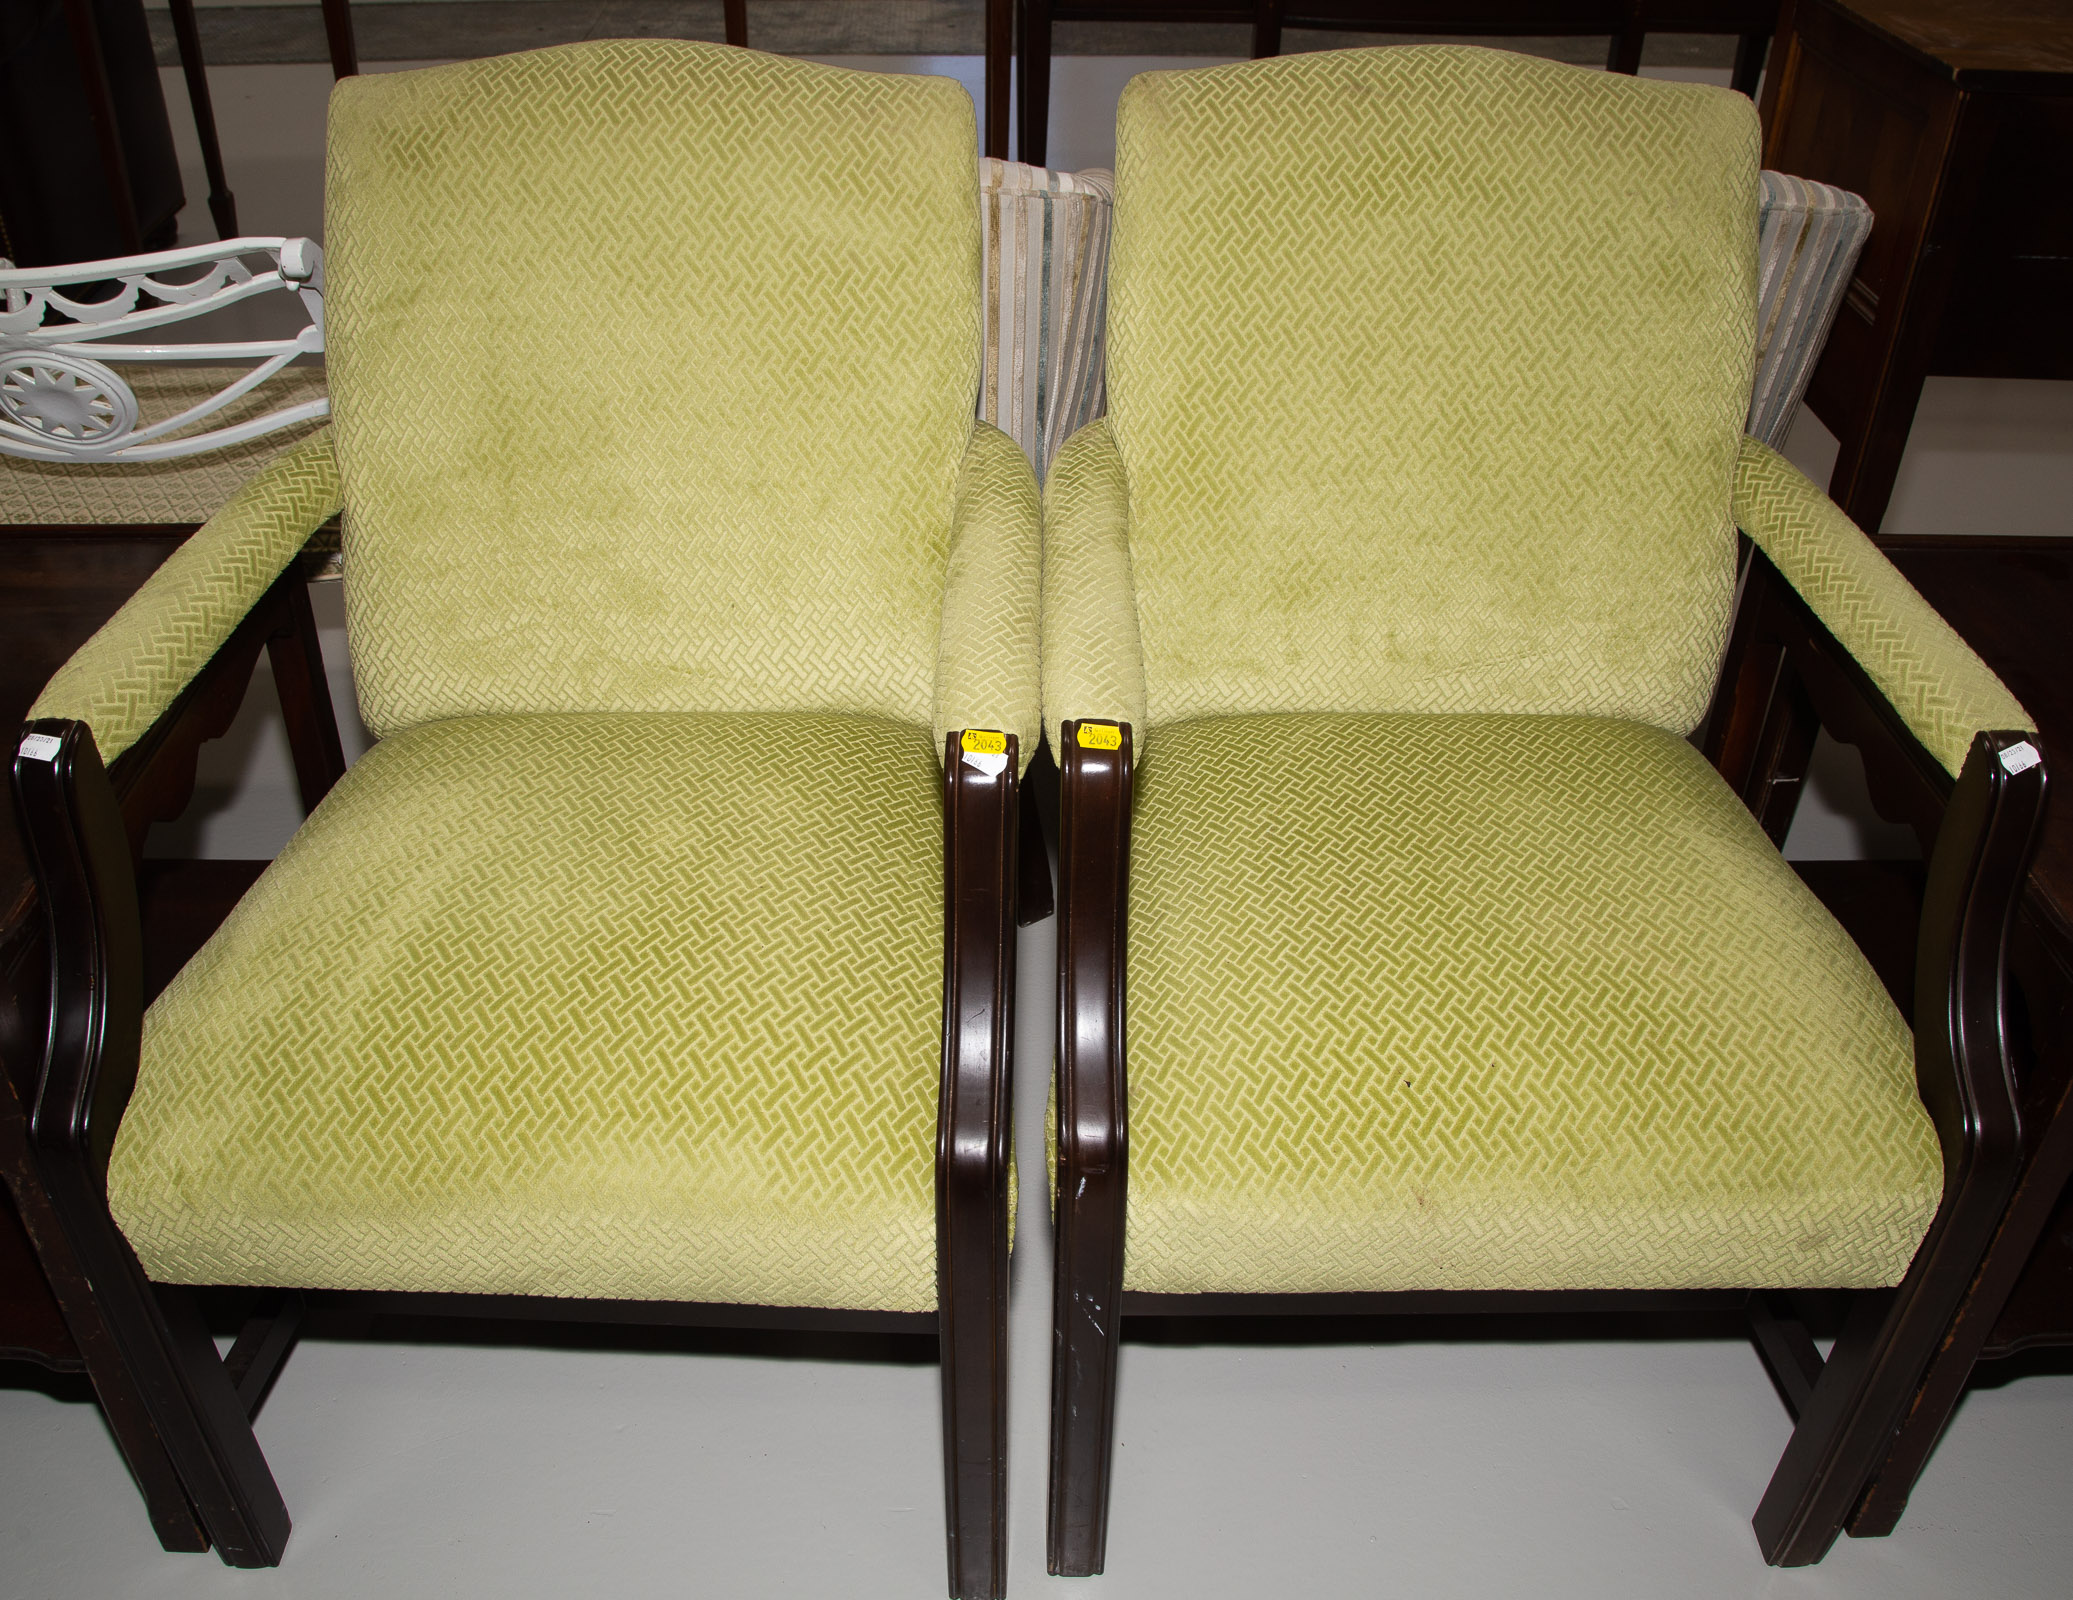 TWO ART DECO STYLE UPHOLSTERED ARM CHAIRS